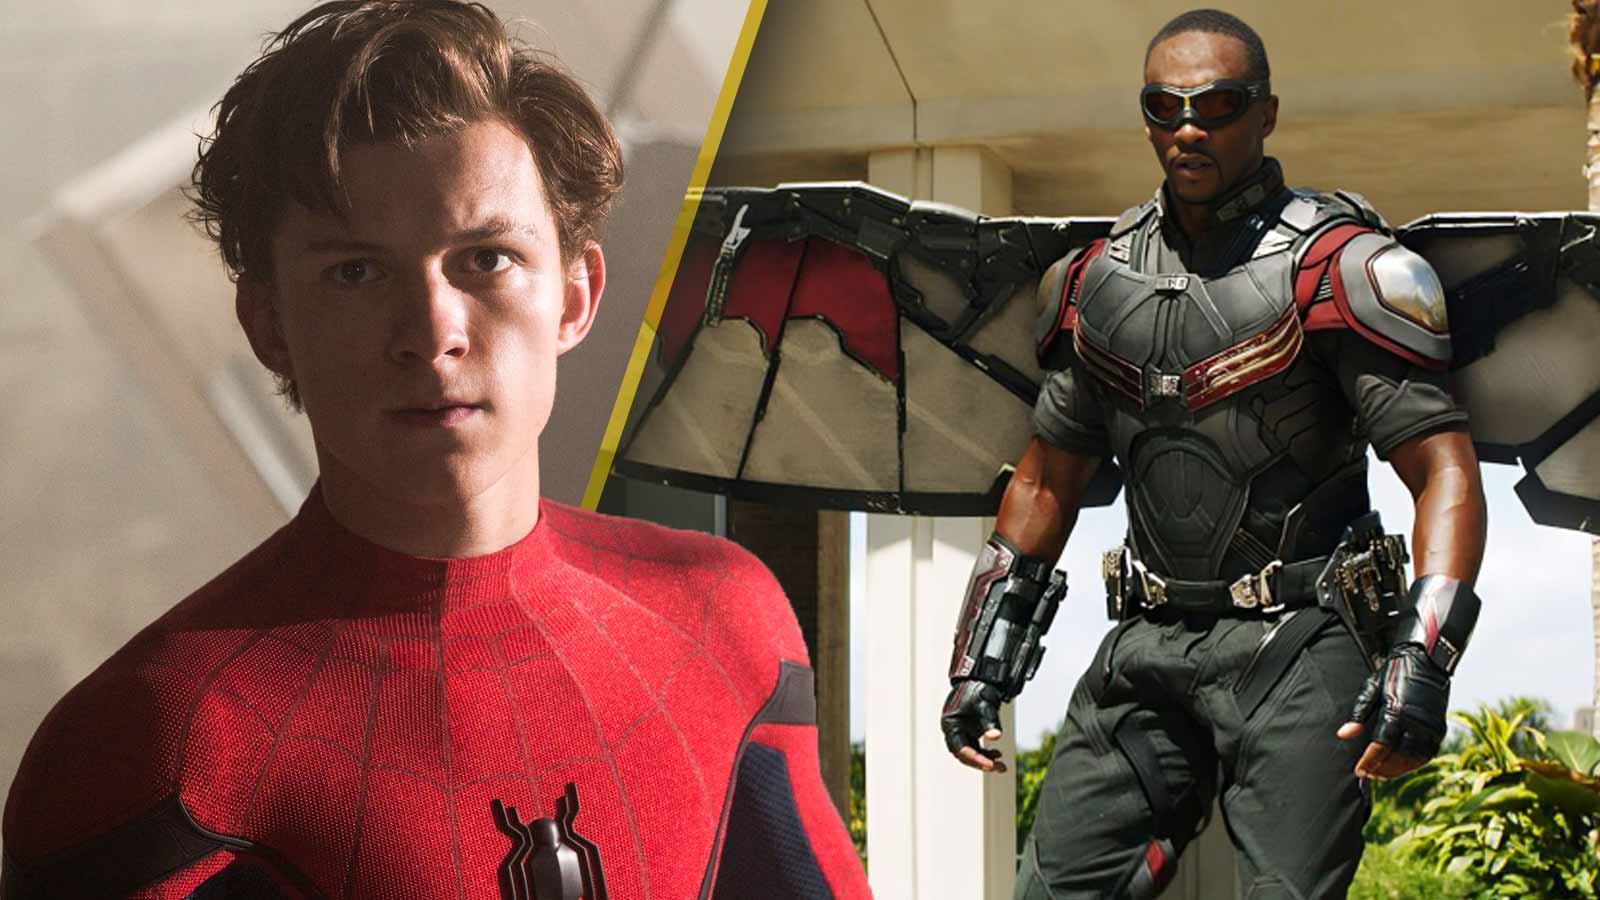 “De Niro in the next Spiderman movie”: MCU Civil War Still Rages on as Anthony Mackie Ups the Stakes in His Personal Vendetta Against Tom Holland